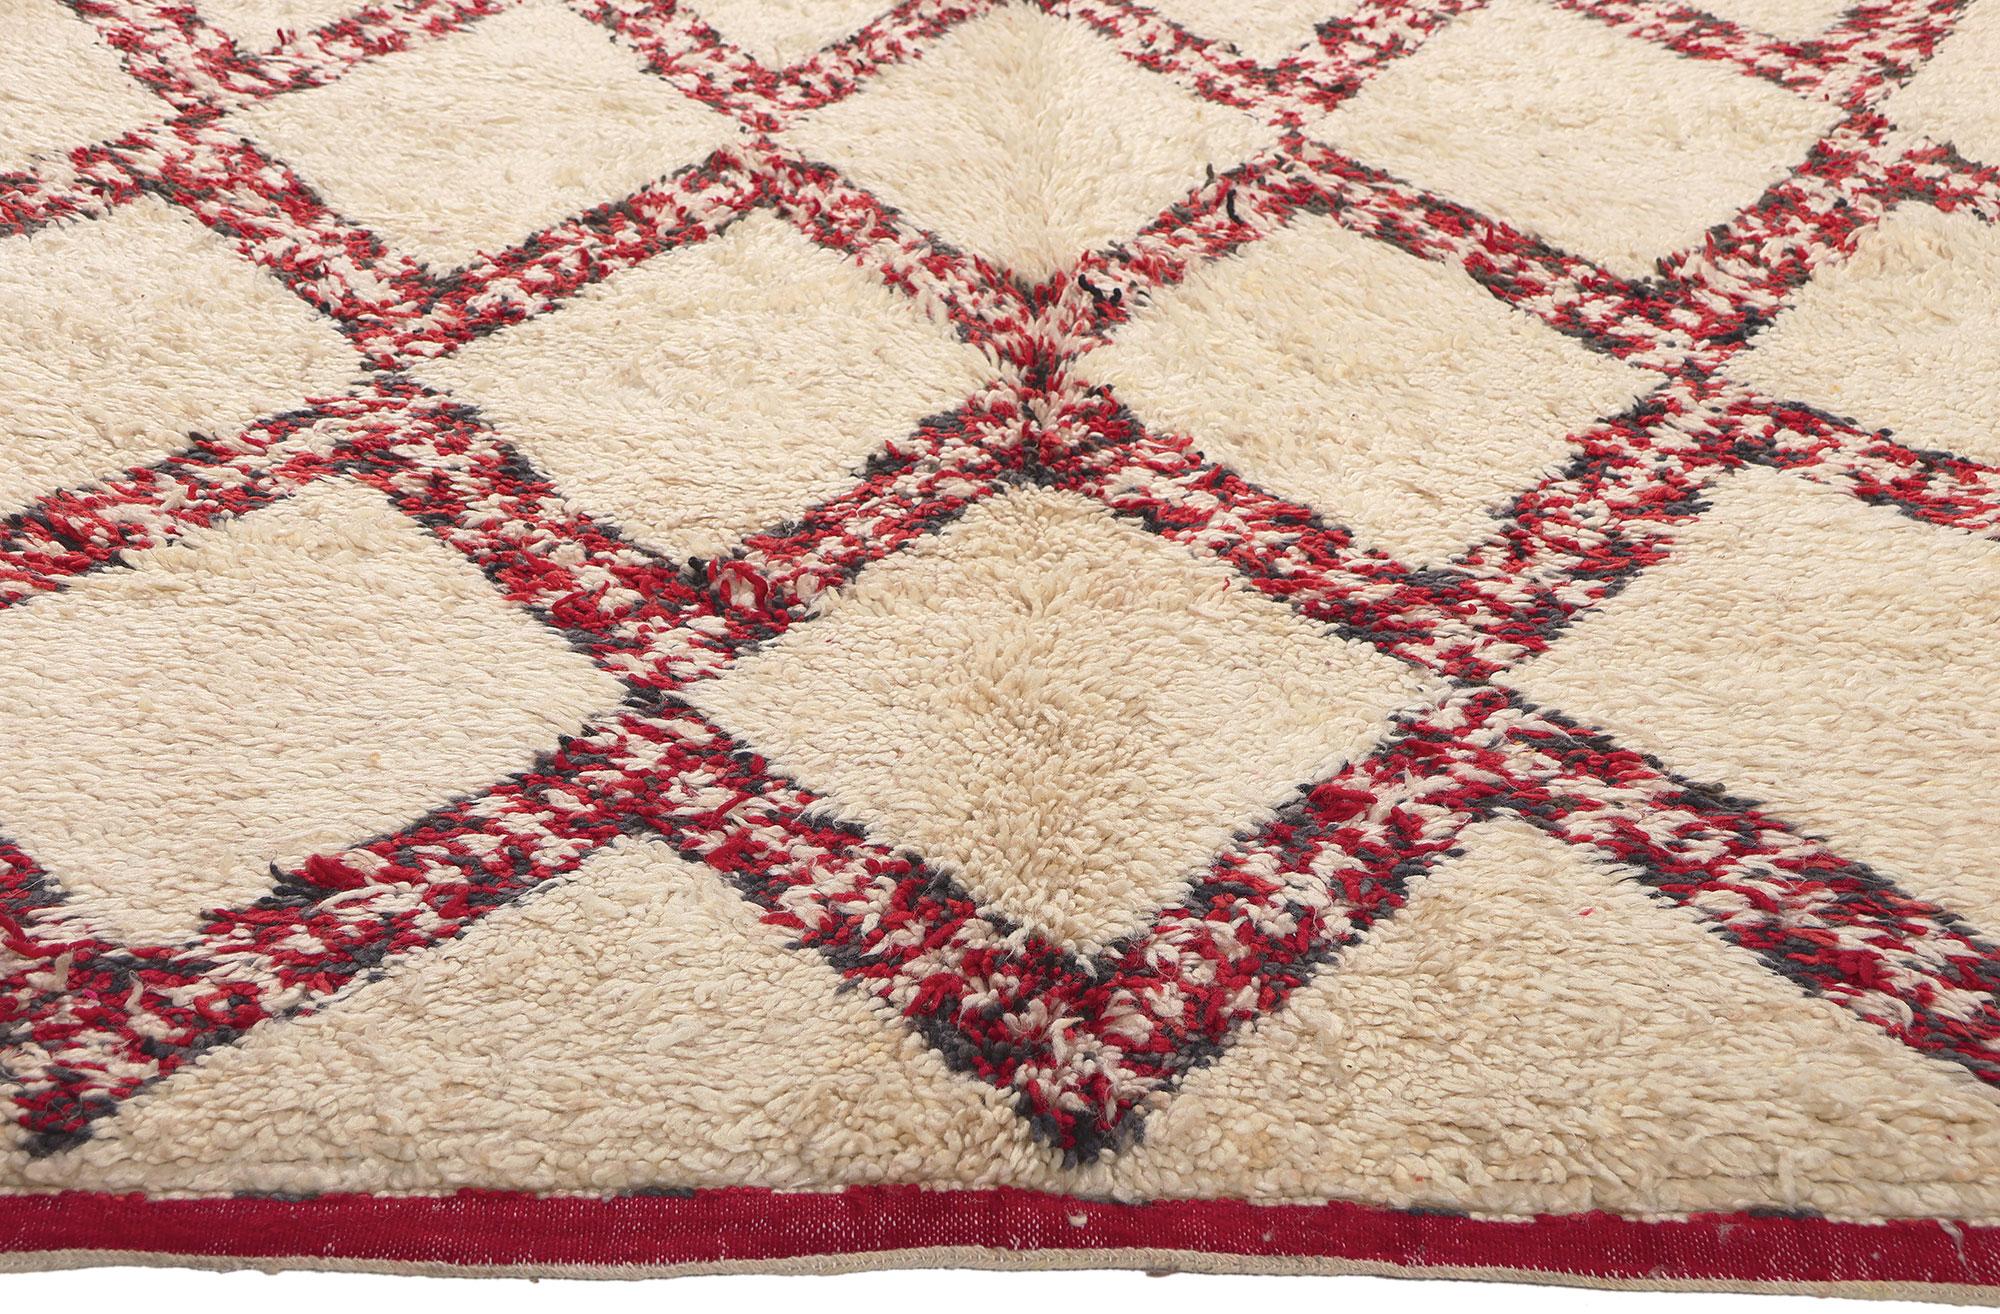 Hand-Knotted Vintage Moroccan Beni Ourain Rug, Midcentury Modern Meets Cozy Hygge For Sale